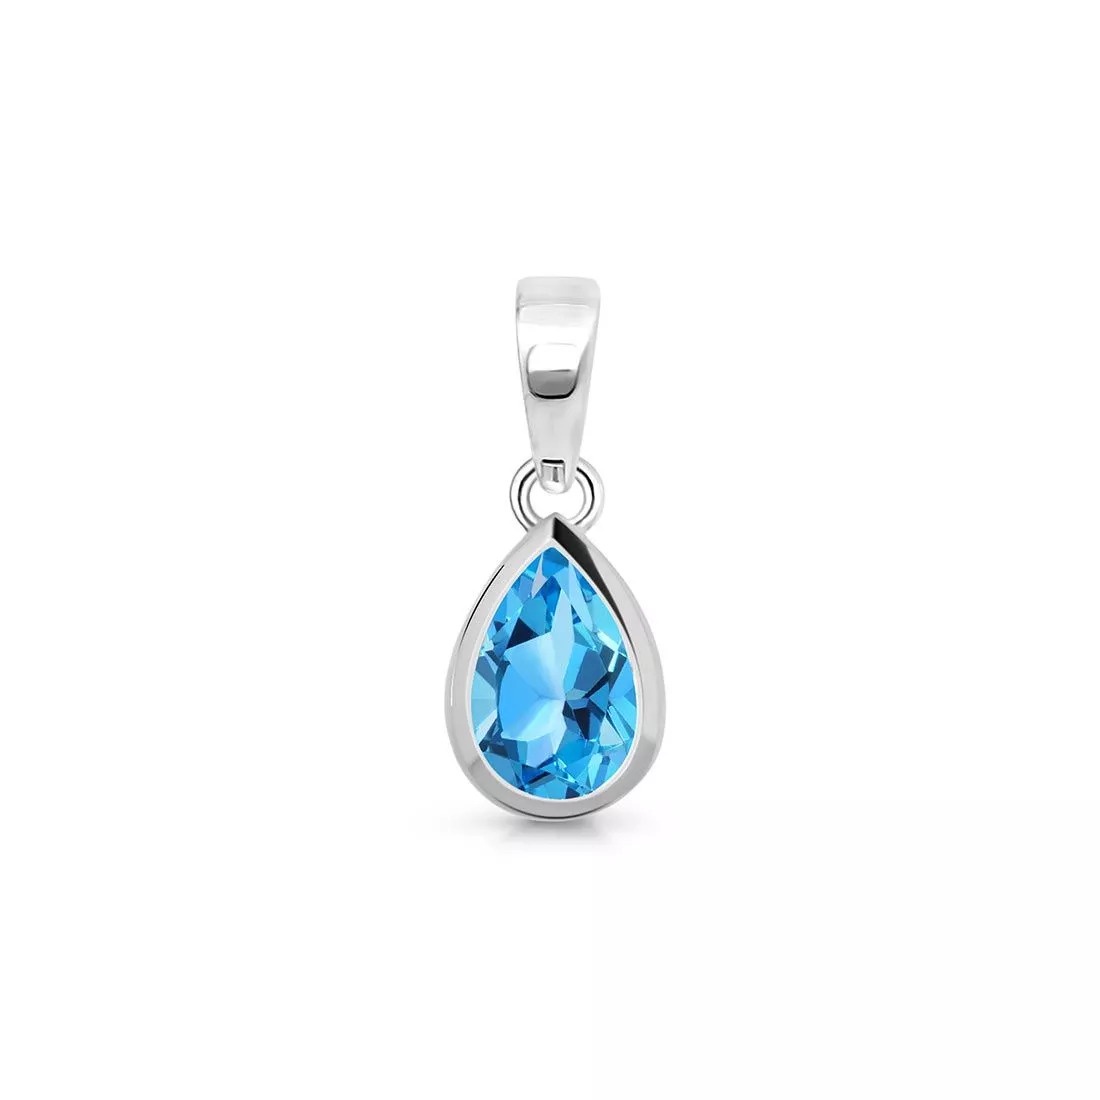 Gorgeous and Antique Swiss Blue Topaz Jewelry